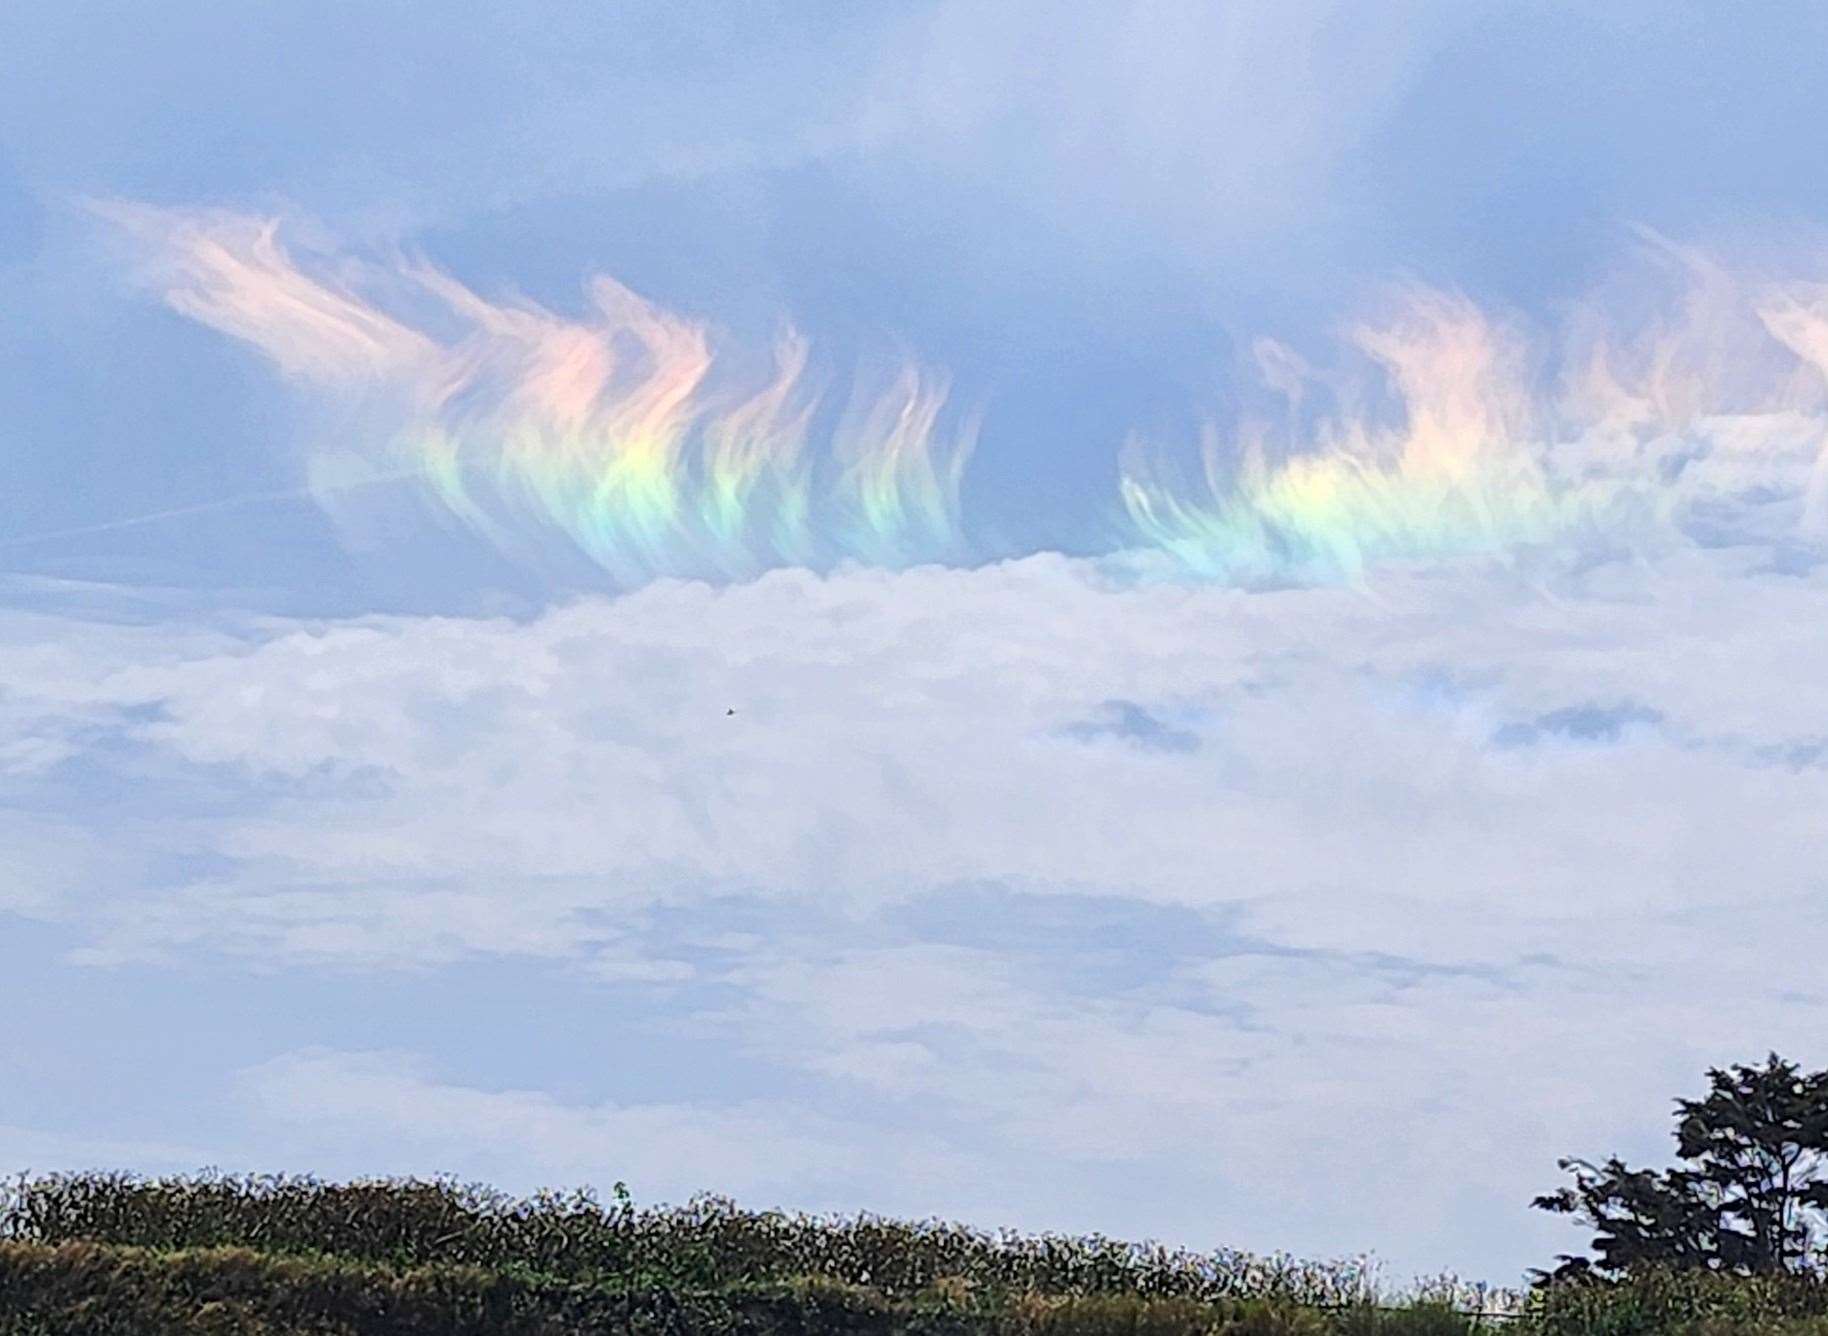 Ken Blight captured these ‘rainbow clouds’ in Westgate-on-Sea